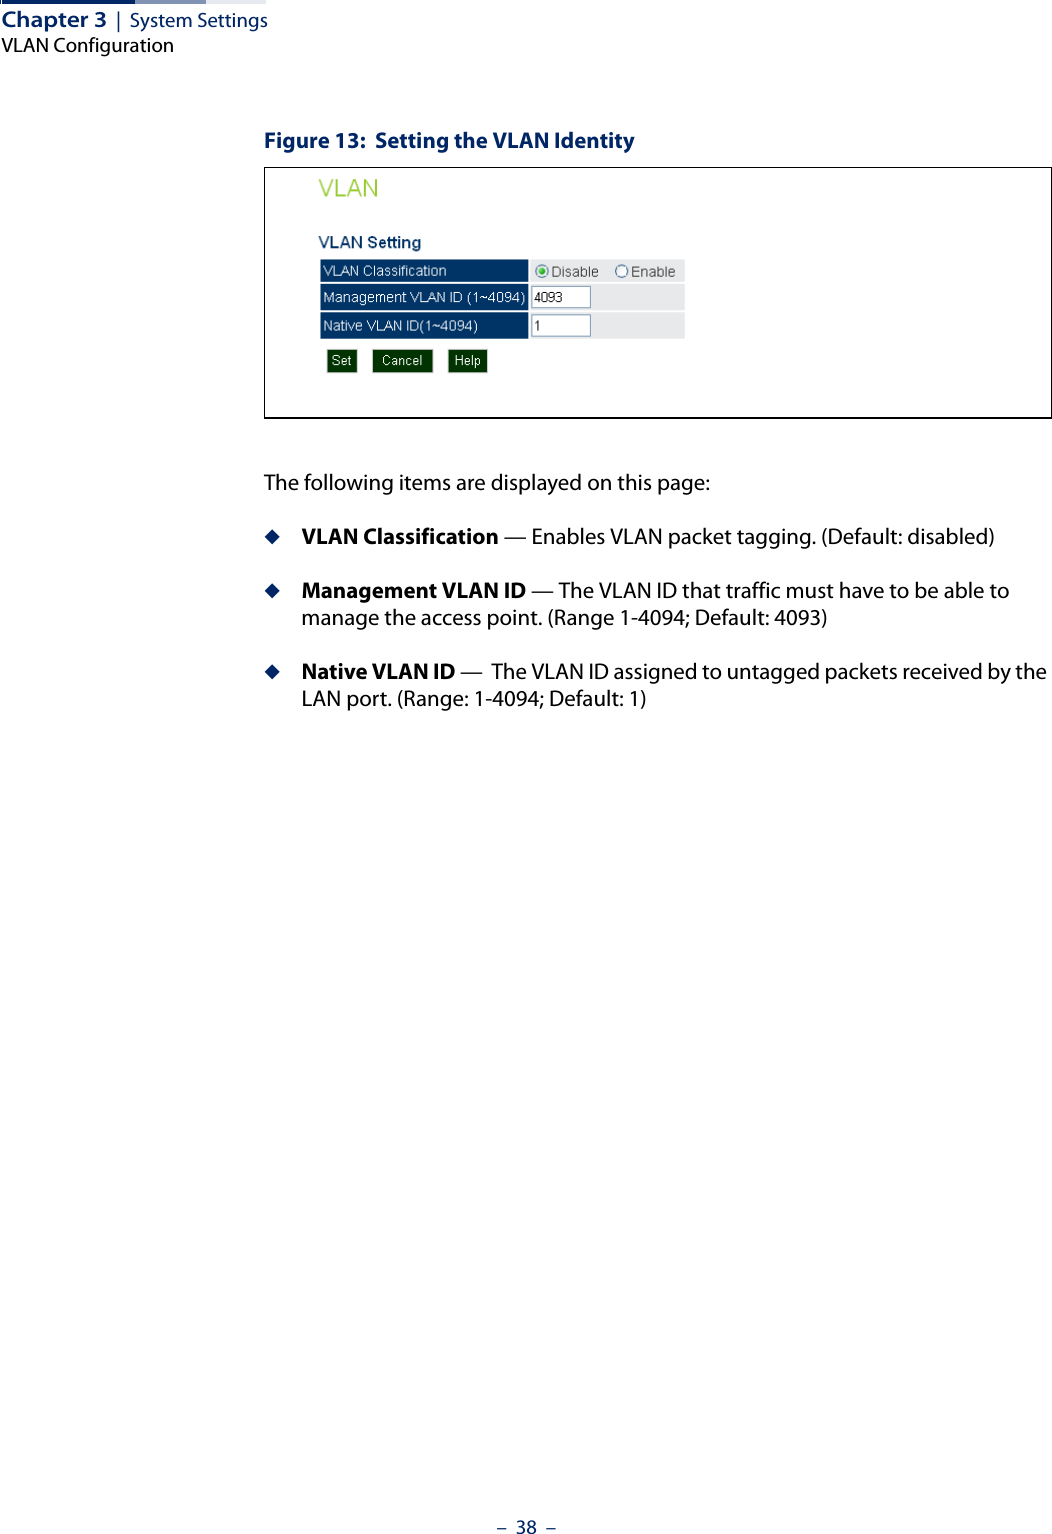 Chapter 3  |  System SettingsVLAN Configuration–  38  –Figure 13:  Setting the VLAN IdentityThe following items are displayed on this page:◆VLAN Classification — Enables VLAN packet tagging. (Default: disabled)◆Management VLAN ID — The VLAN ID that traffic must have to be able to manage the access point. (Range 1-4094; Default: 4093)◆Native VLAN ID —  The VLAN ID assigned to untagged packets received by the LAN port. (Range: 1-4094; Default: 1)